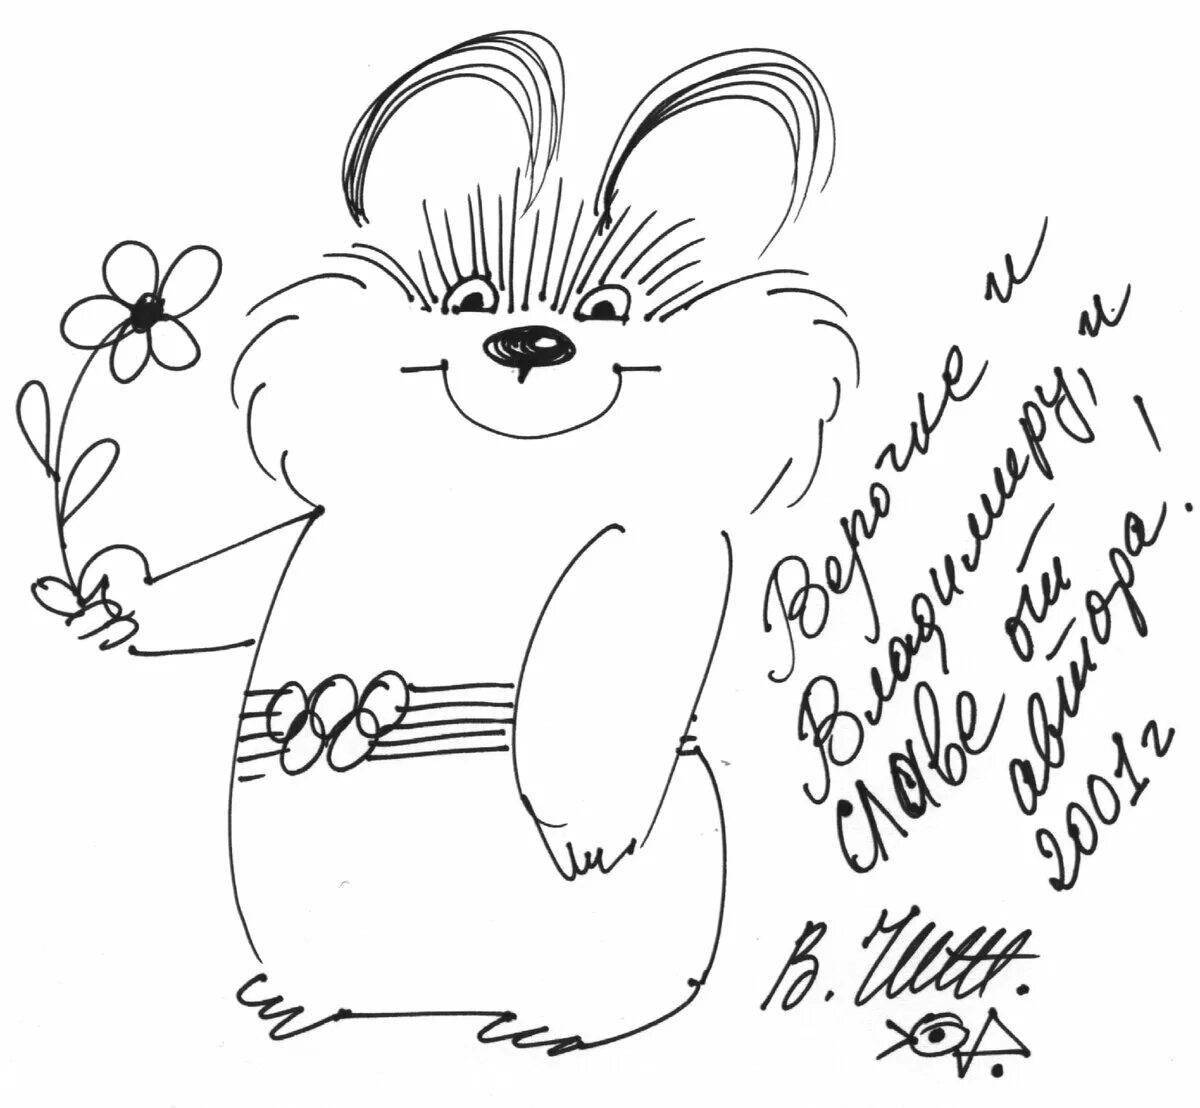 Glorious olympic bear coloring pages for kids